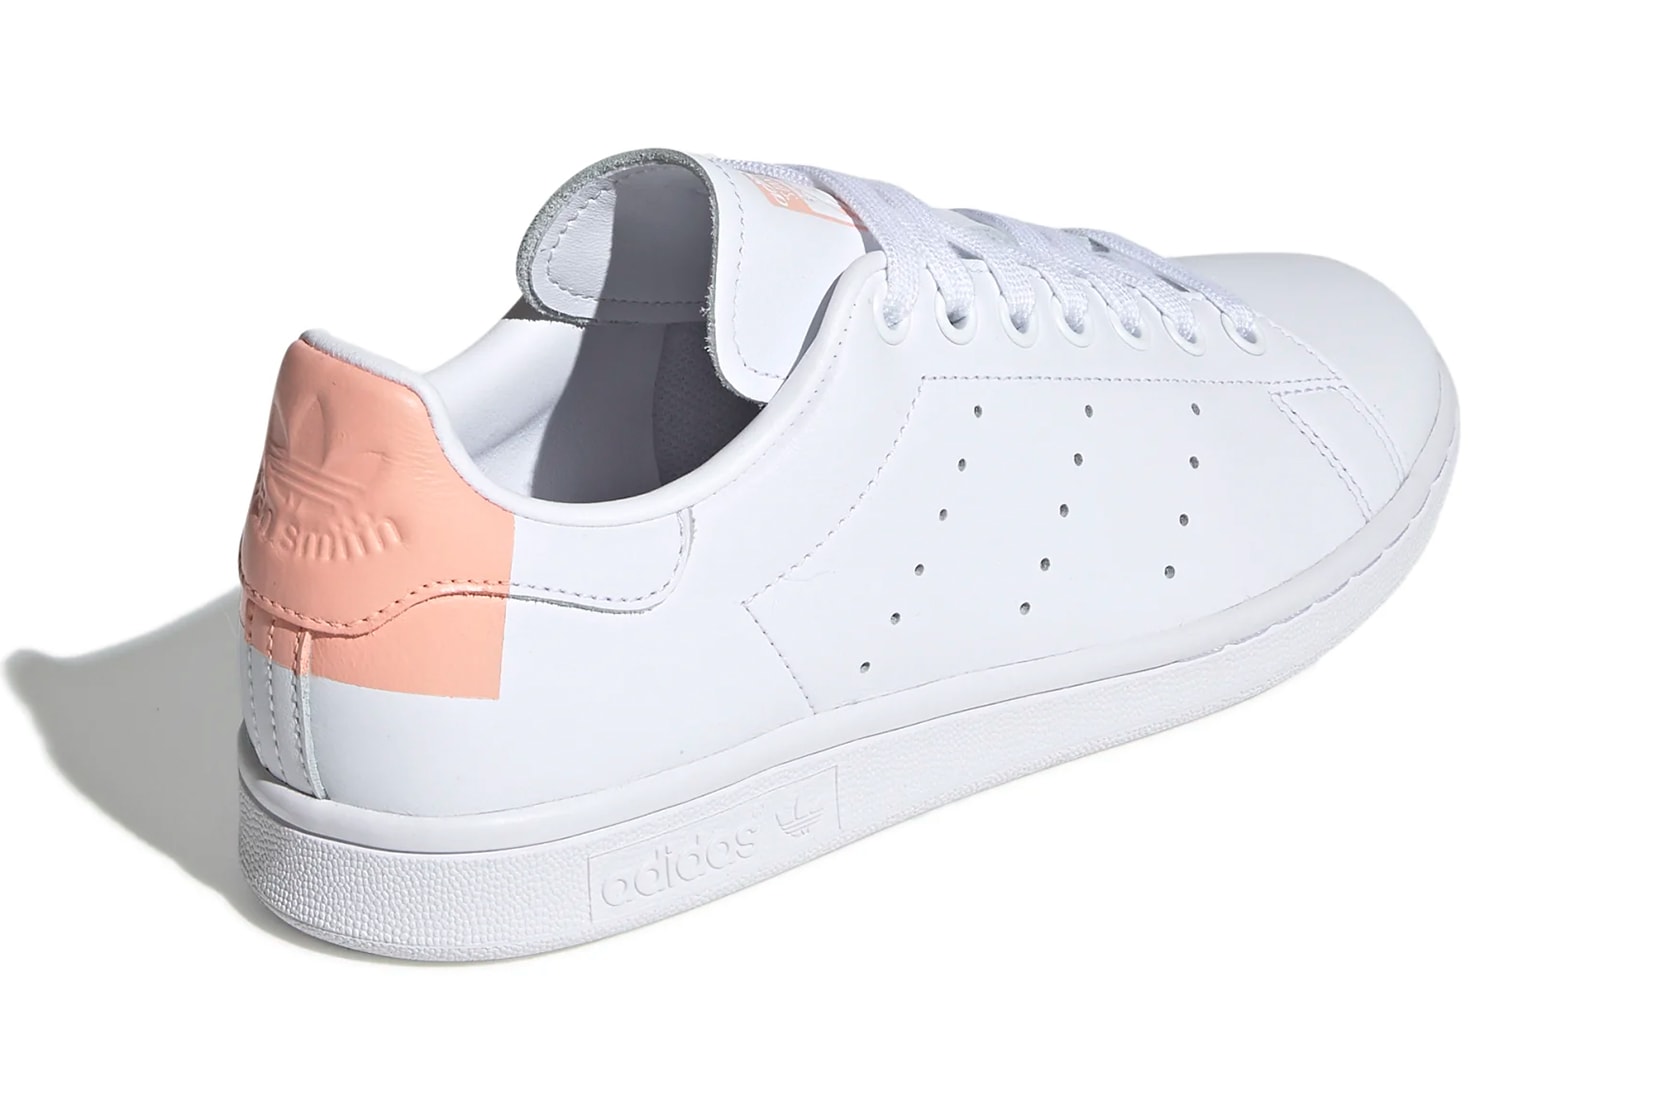 adidas stan smith cloud white glow pink color blocked tennis sneaker